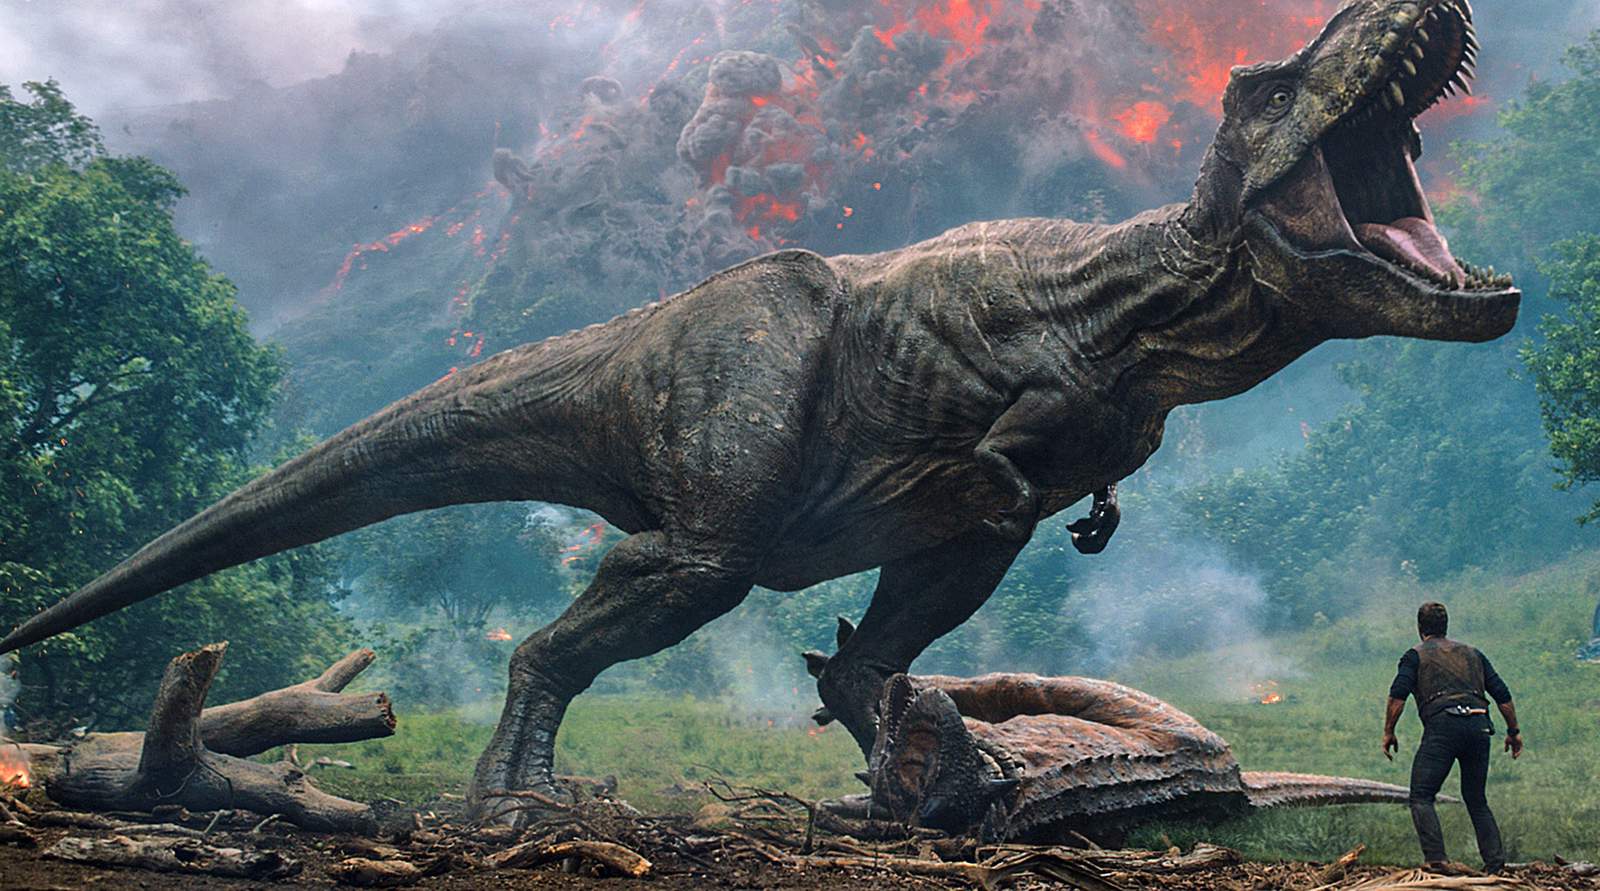 'Jurassic World' shoot suspended after COVID-19 positives